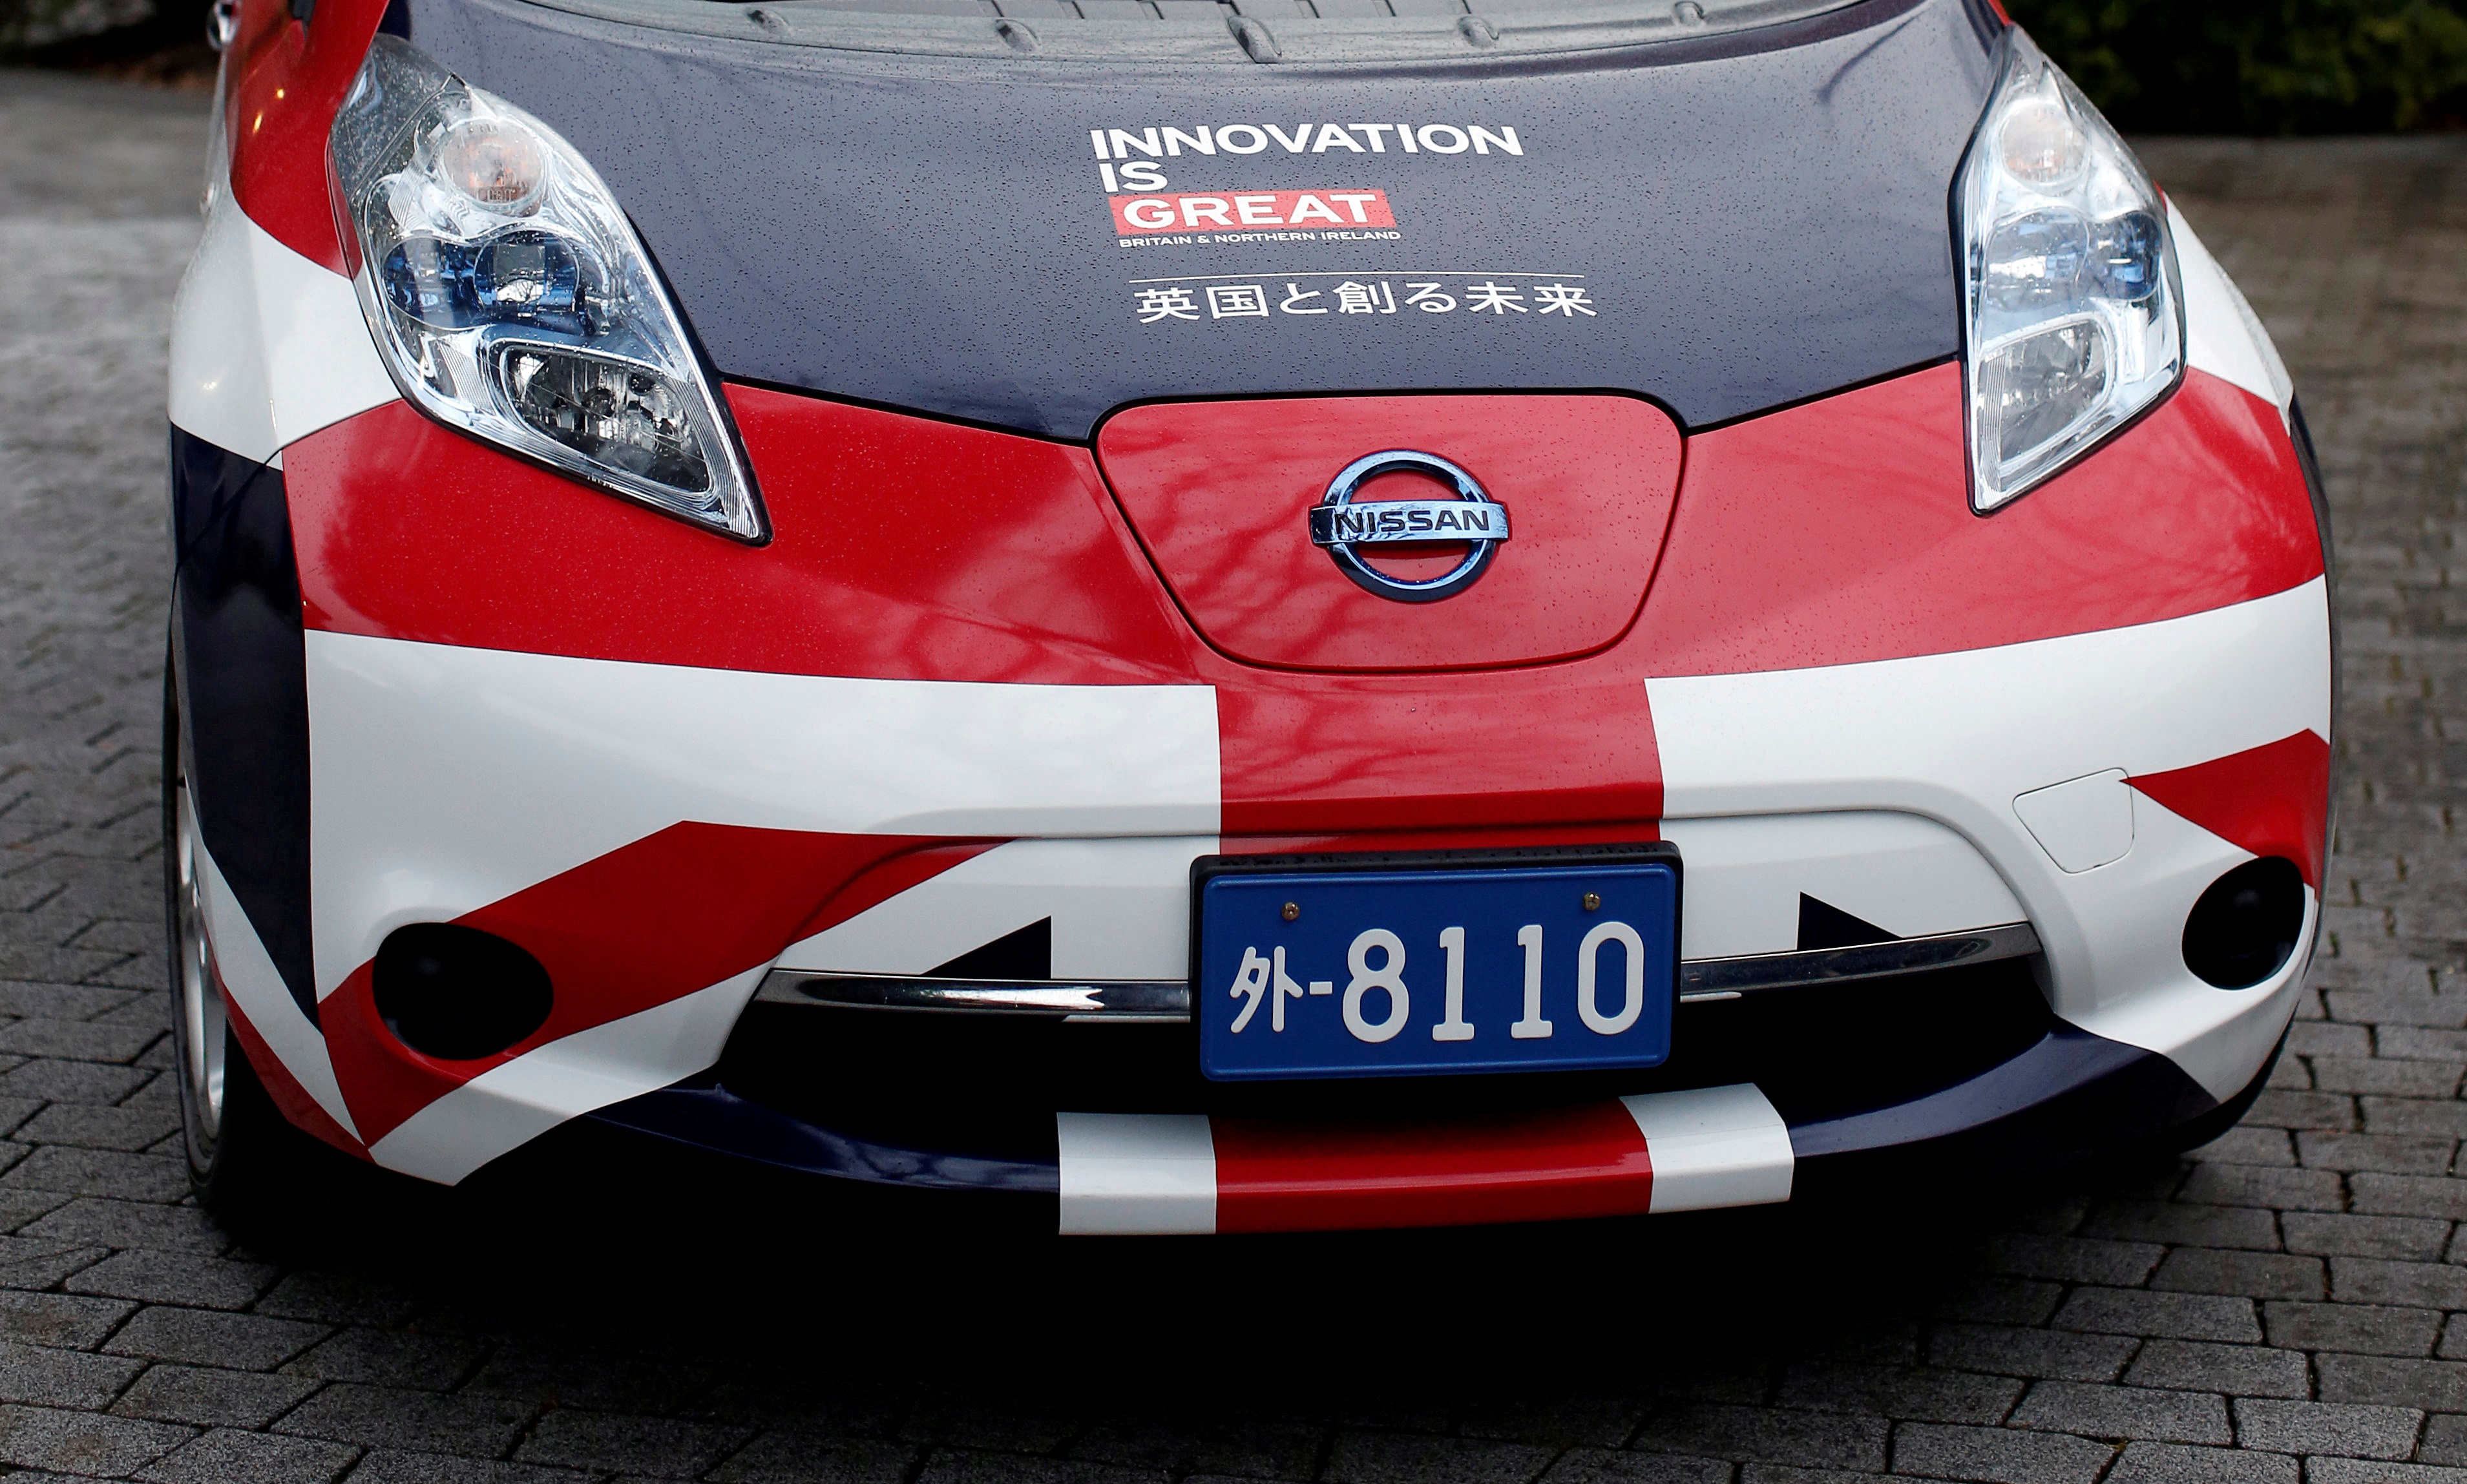 Union Jack painted Nissan Leaf electric vehicle is displayed at the British Embassy in Tokyo